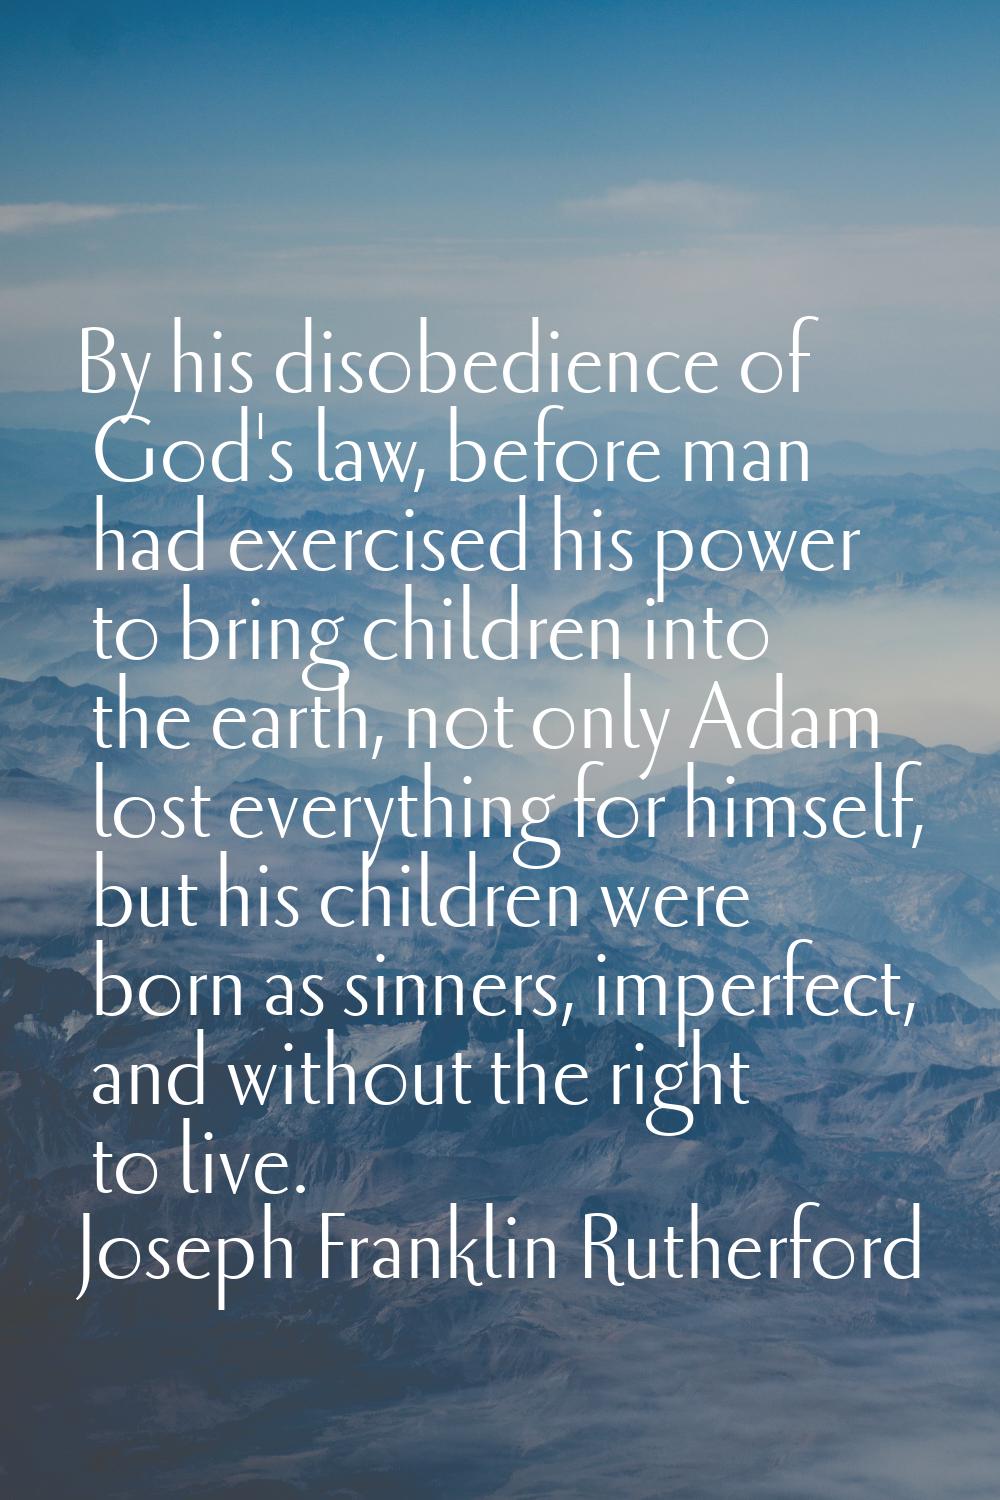 By his disobedience of God's law, before man had exercised his power to bring children into the ear